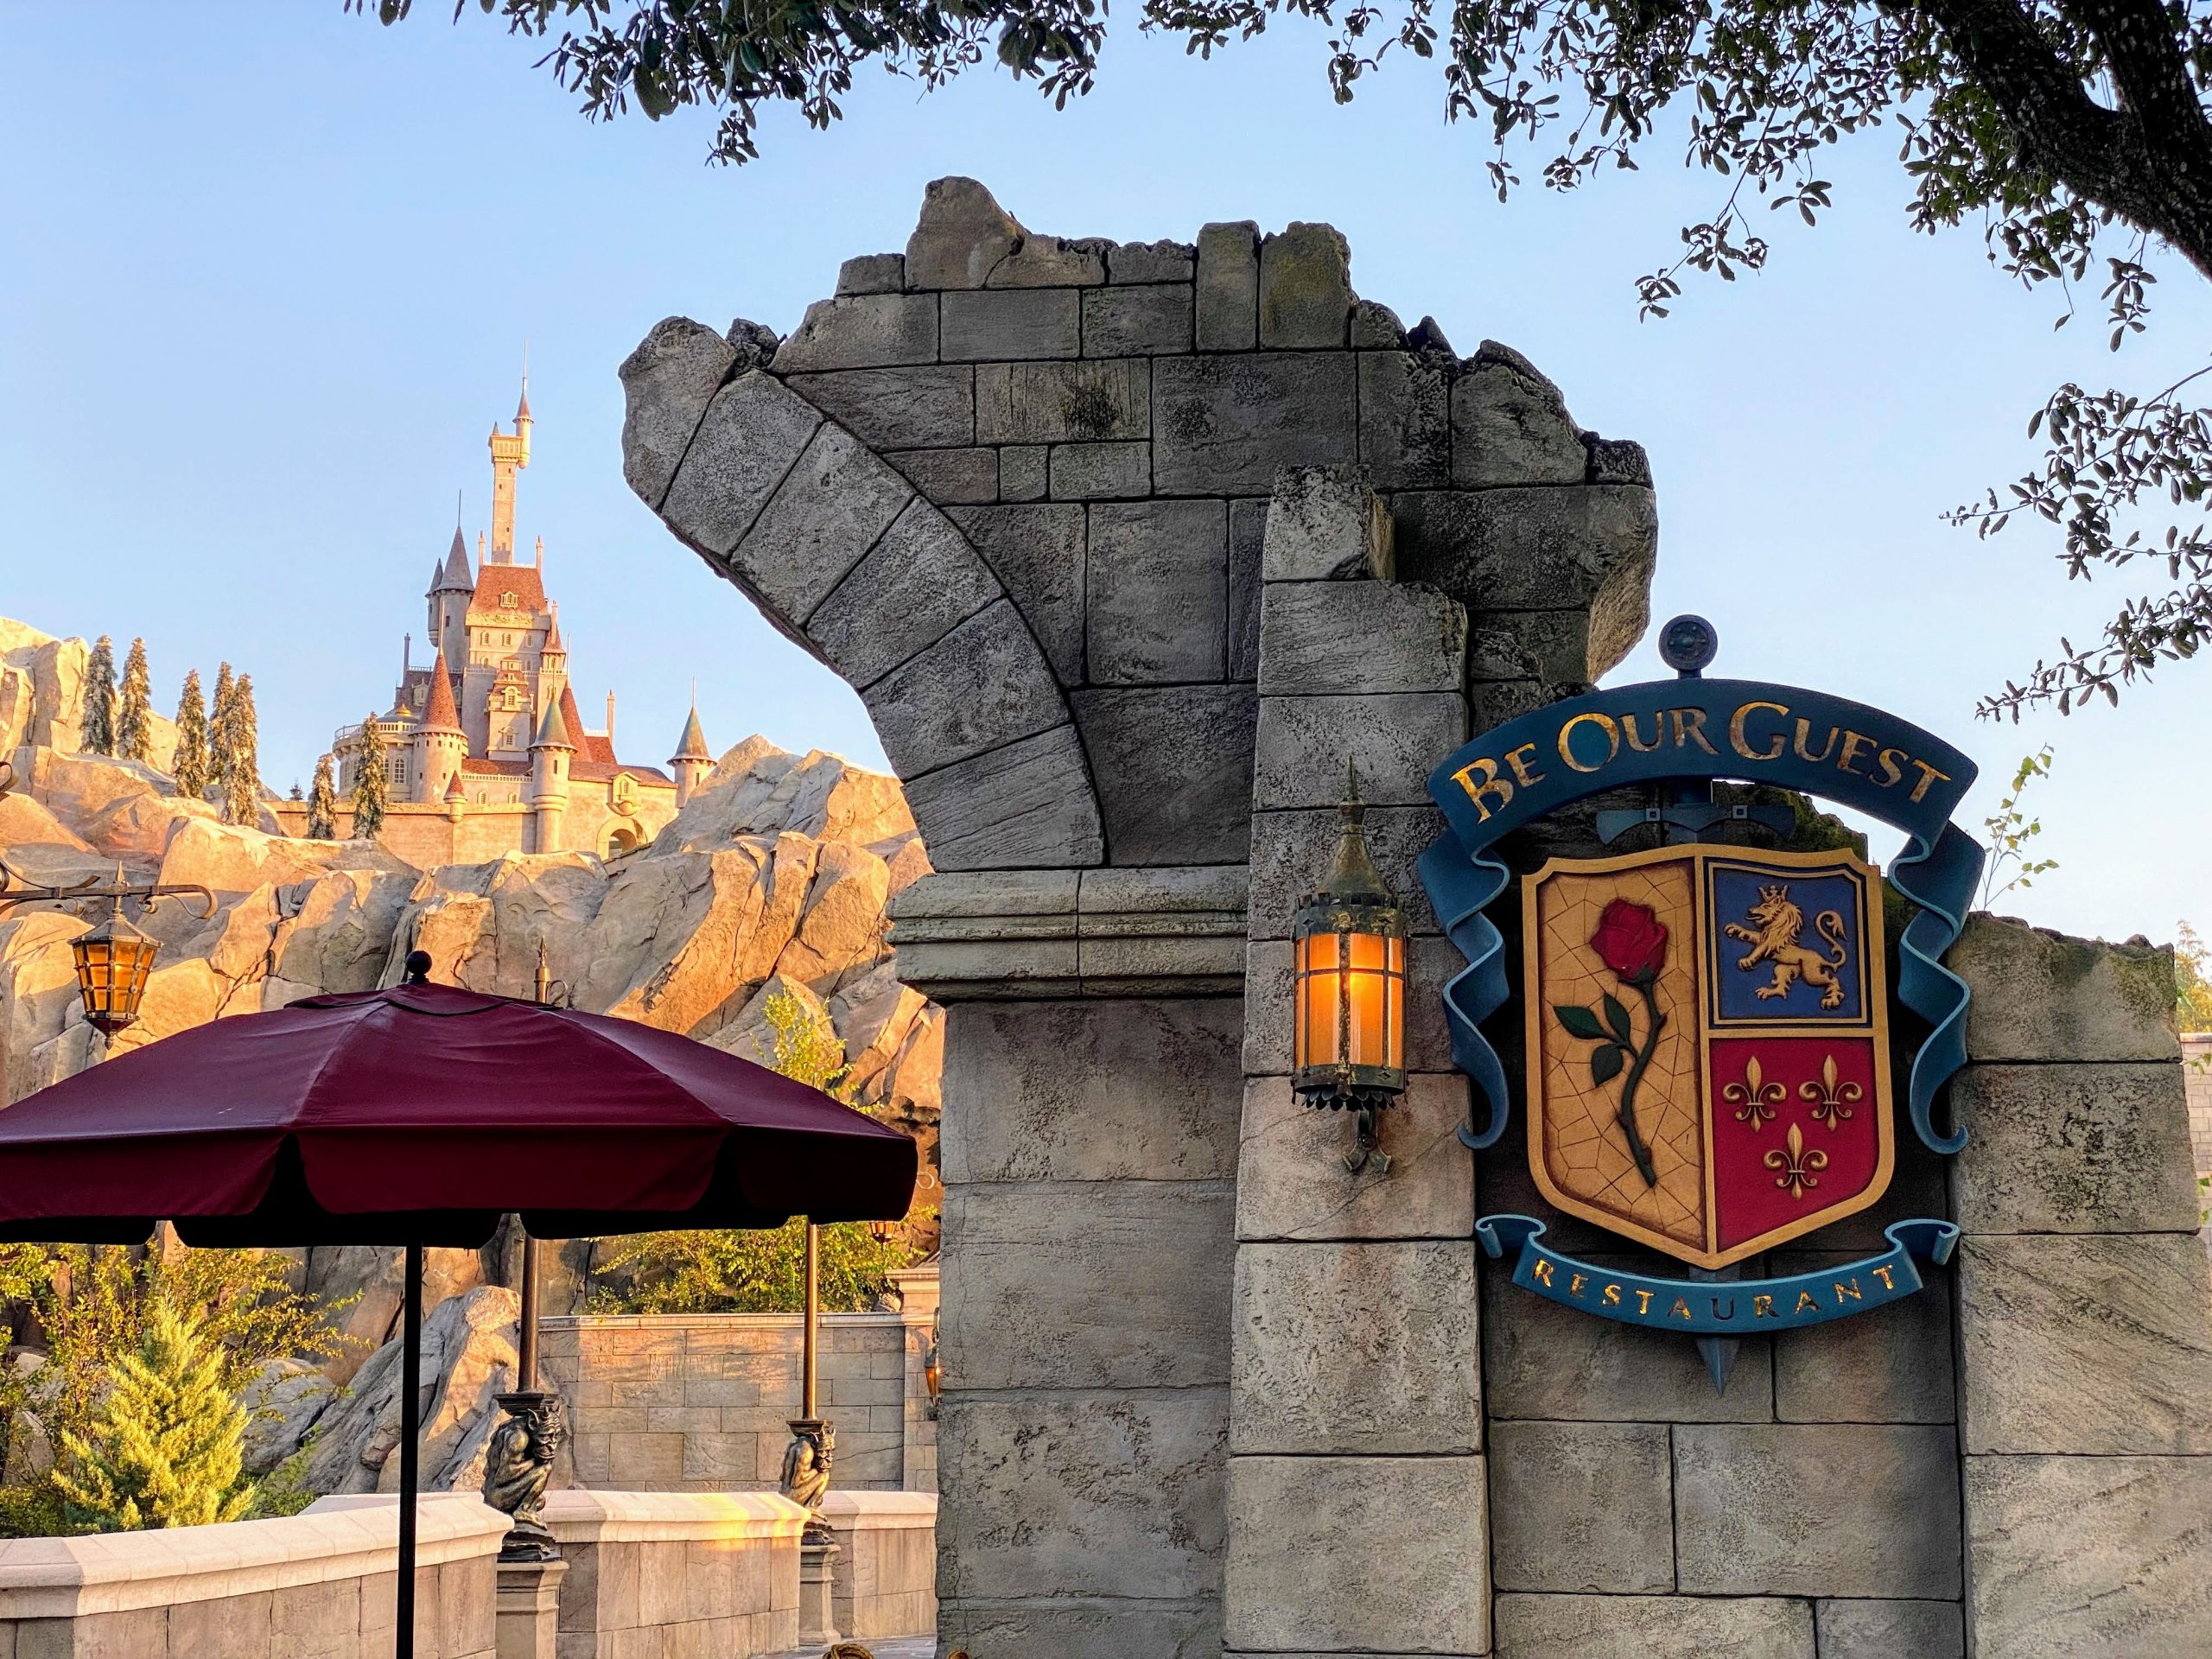 Tips for dining at Be Our Guest Restaurant - WDW Prep School